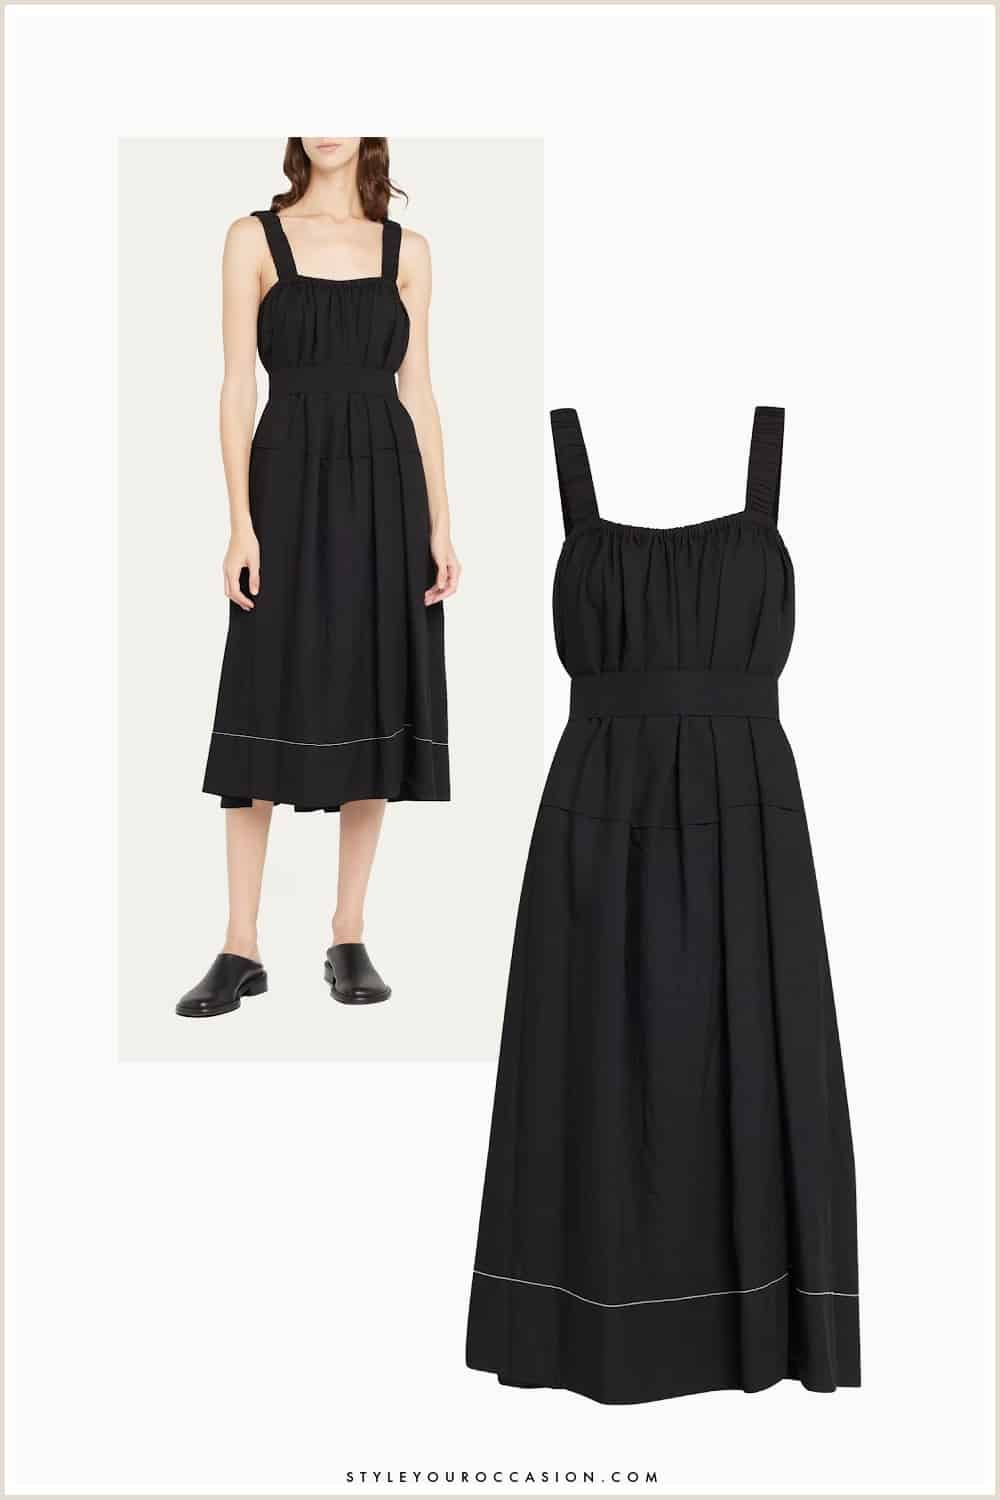 image of a woman in a black midi tank dress with black mules